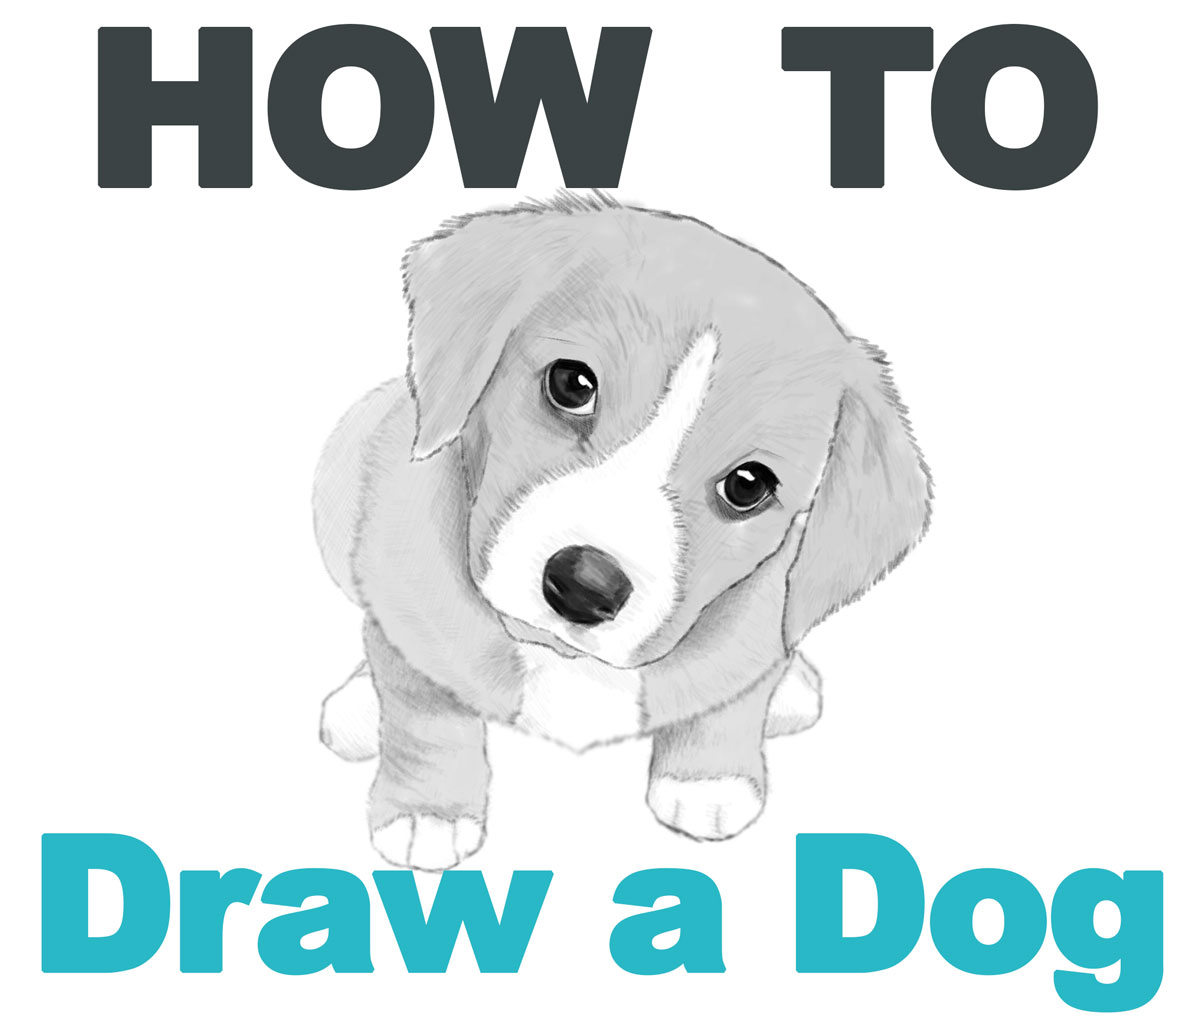 How to Draw a Dog or Puppy - Easy Step by Step Drawing Tutorial